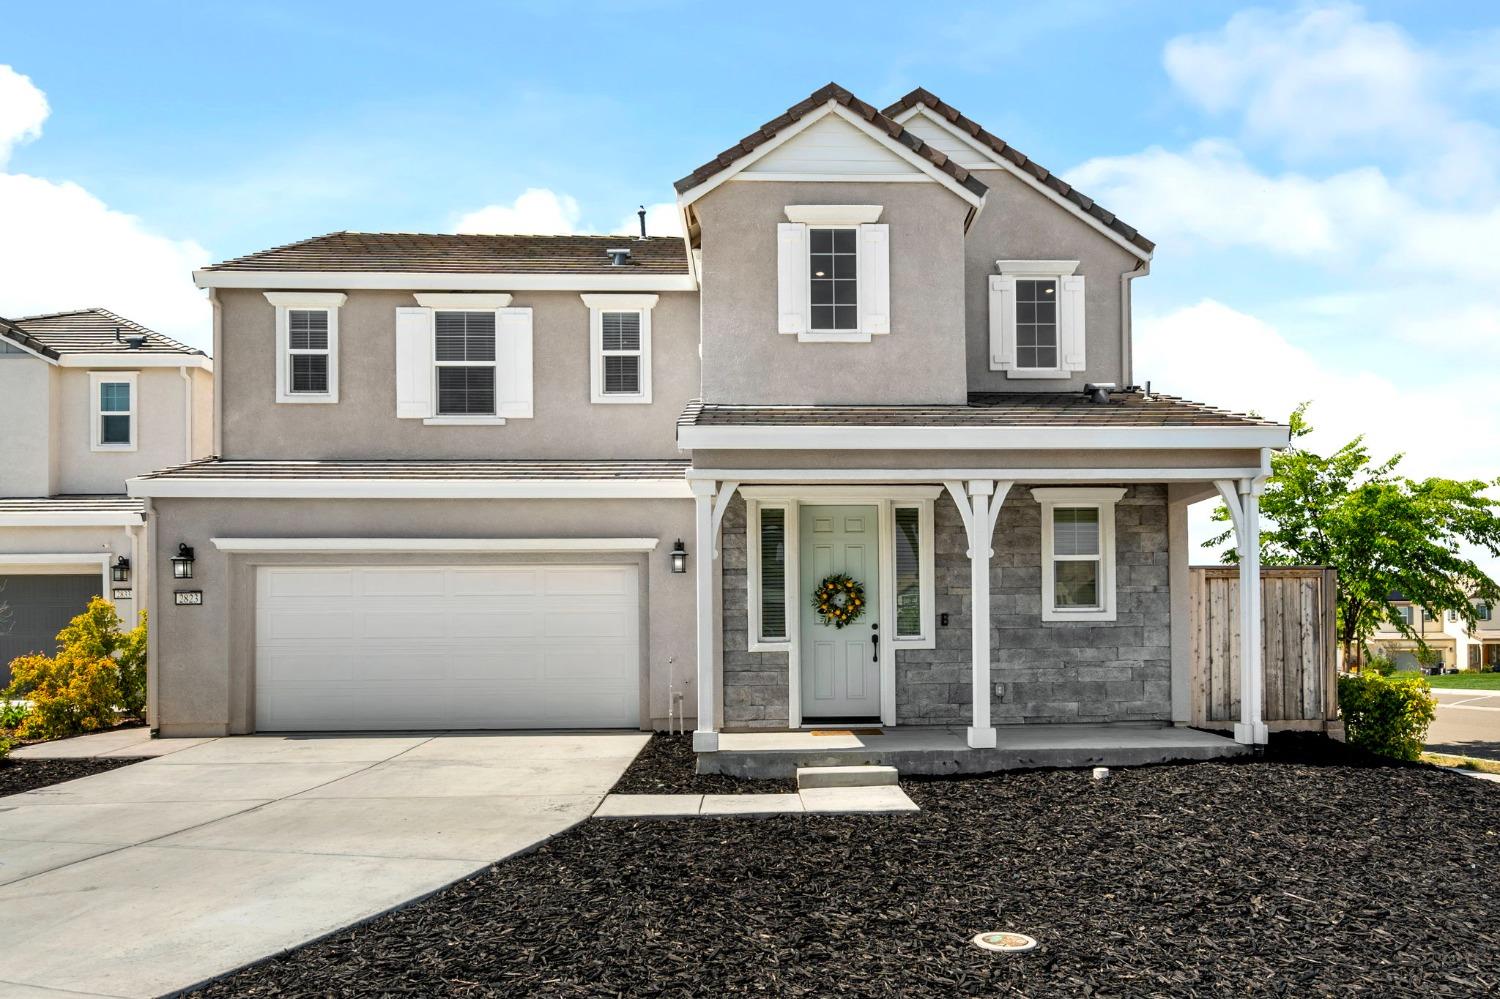 Photo of 2823 Paver Ct in Tracy, CA